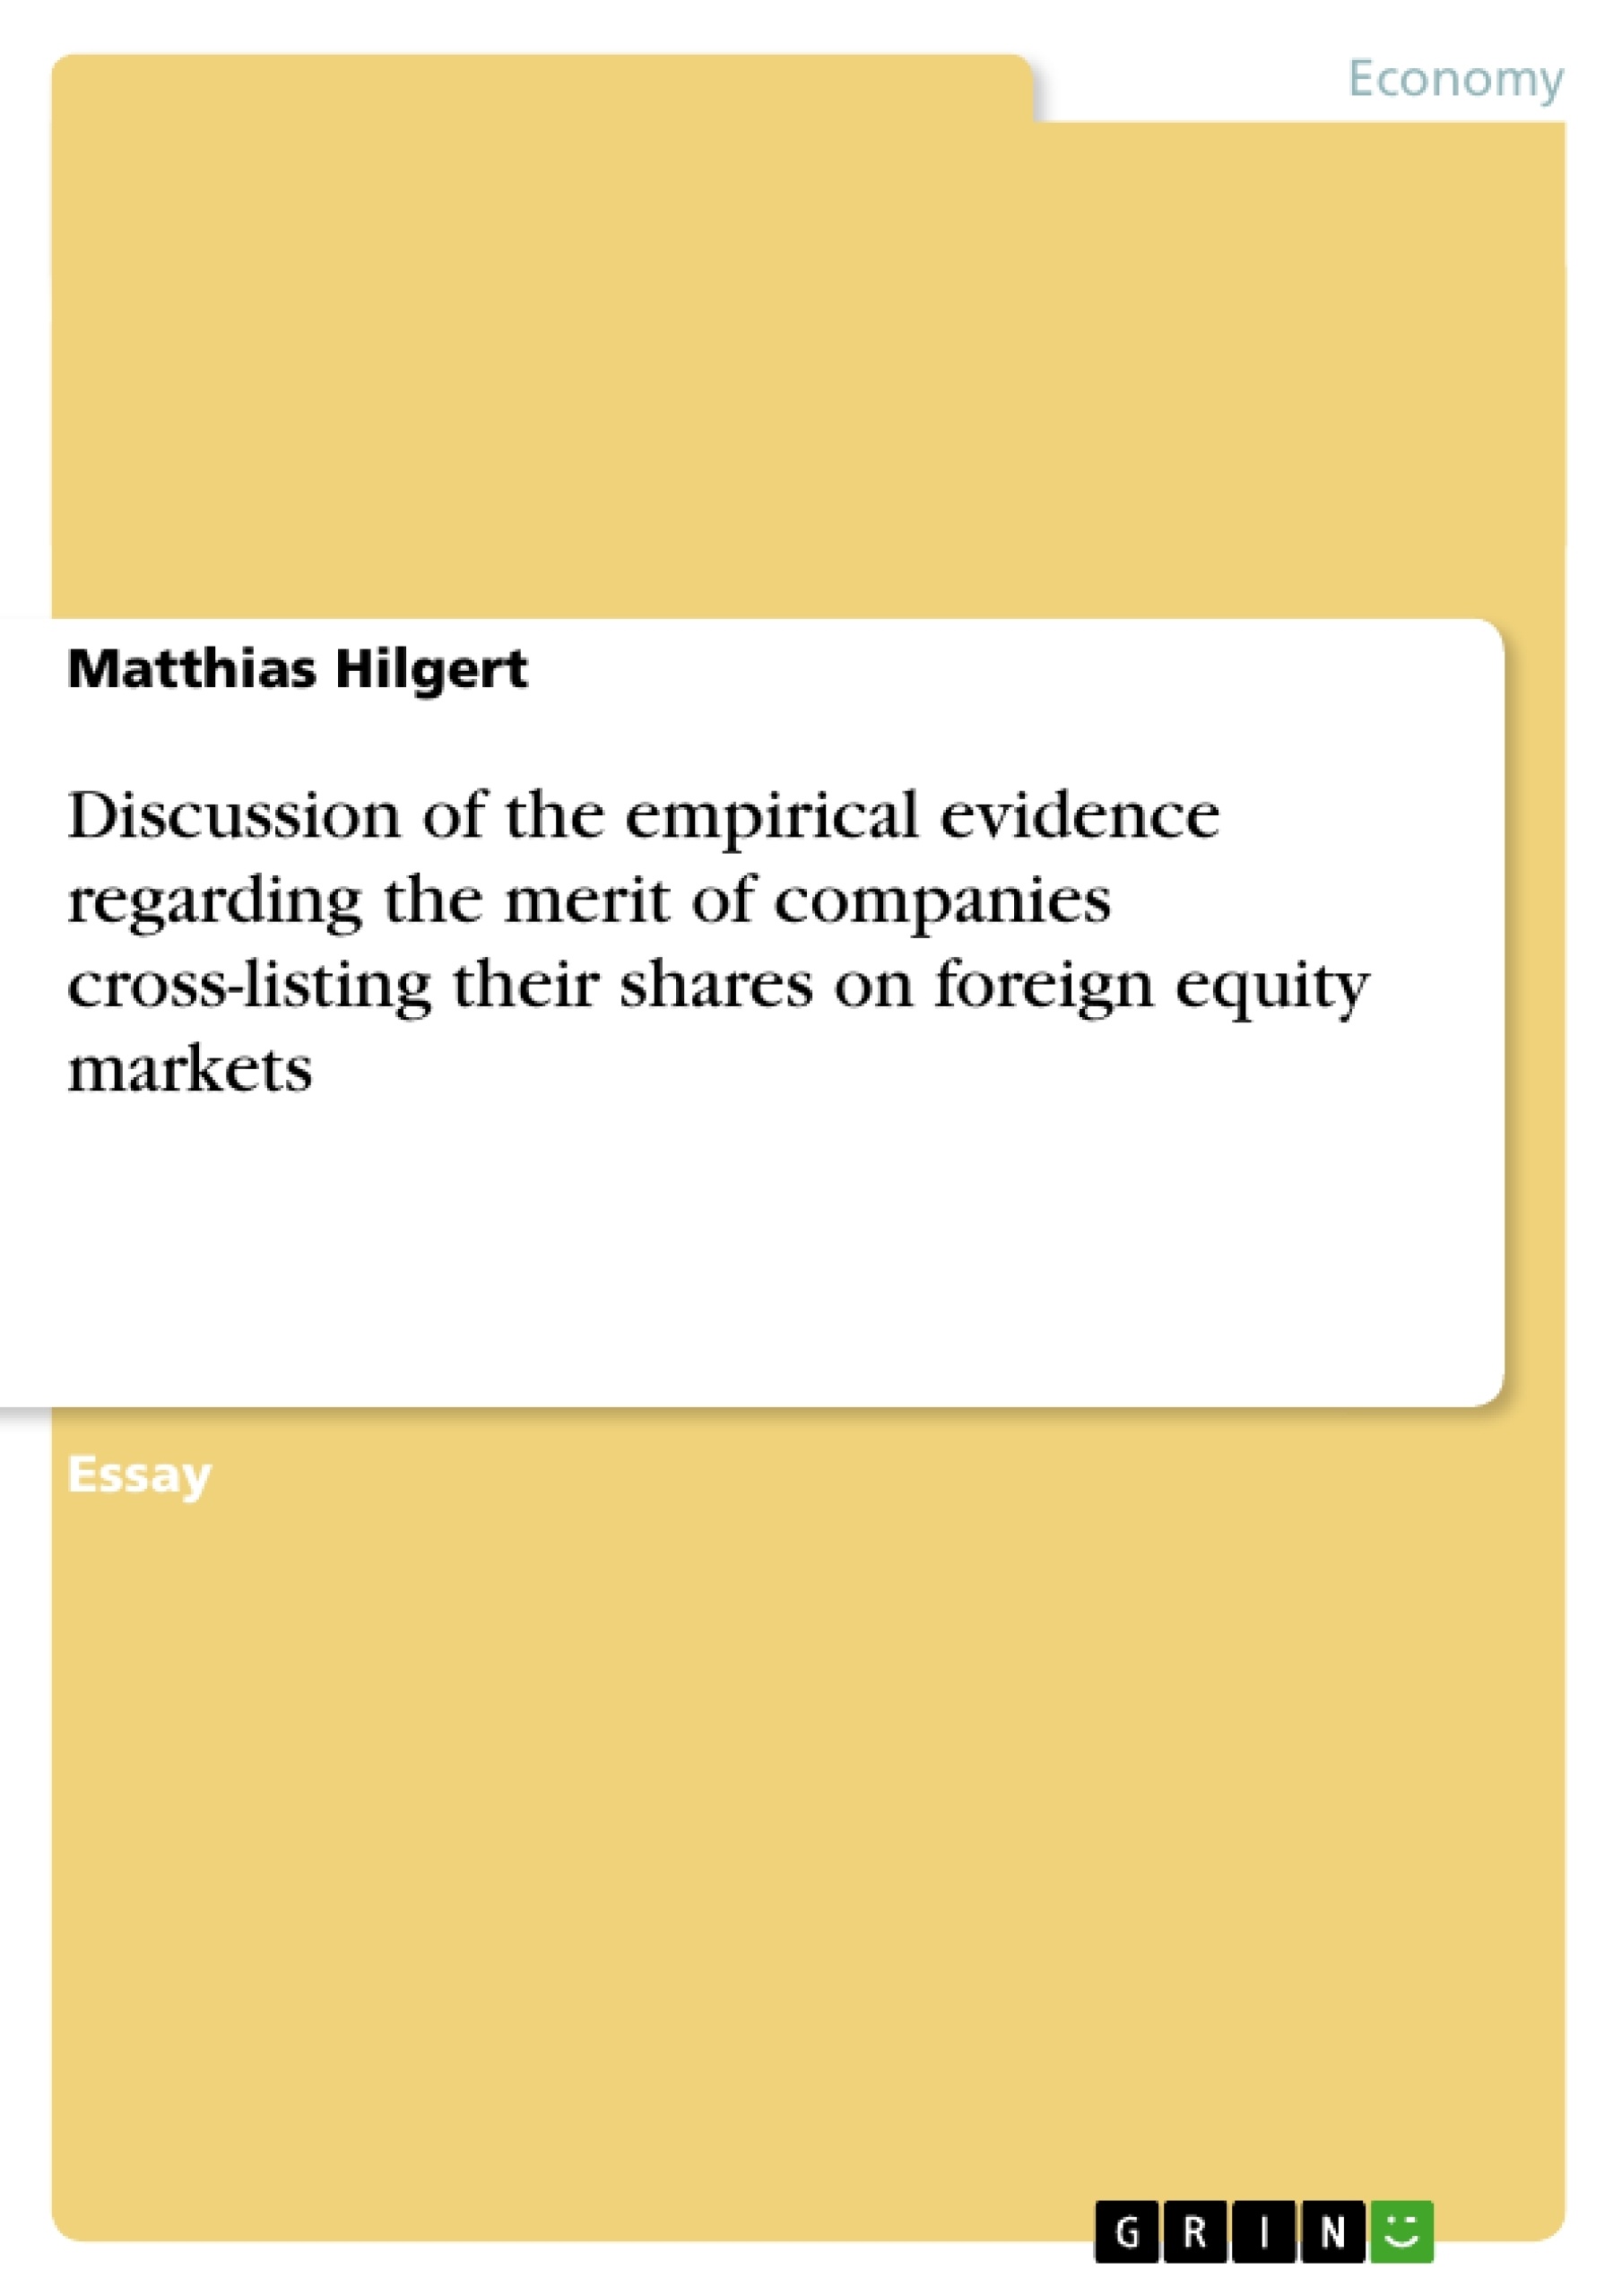 Title: Discussion of the empirical evidence regarding the merit of companies cross-listing their shares on foreign equity markets